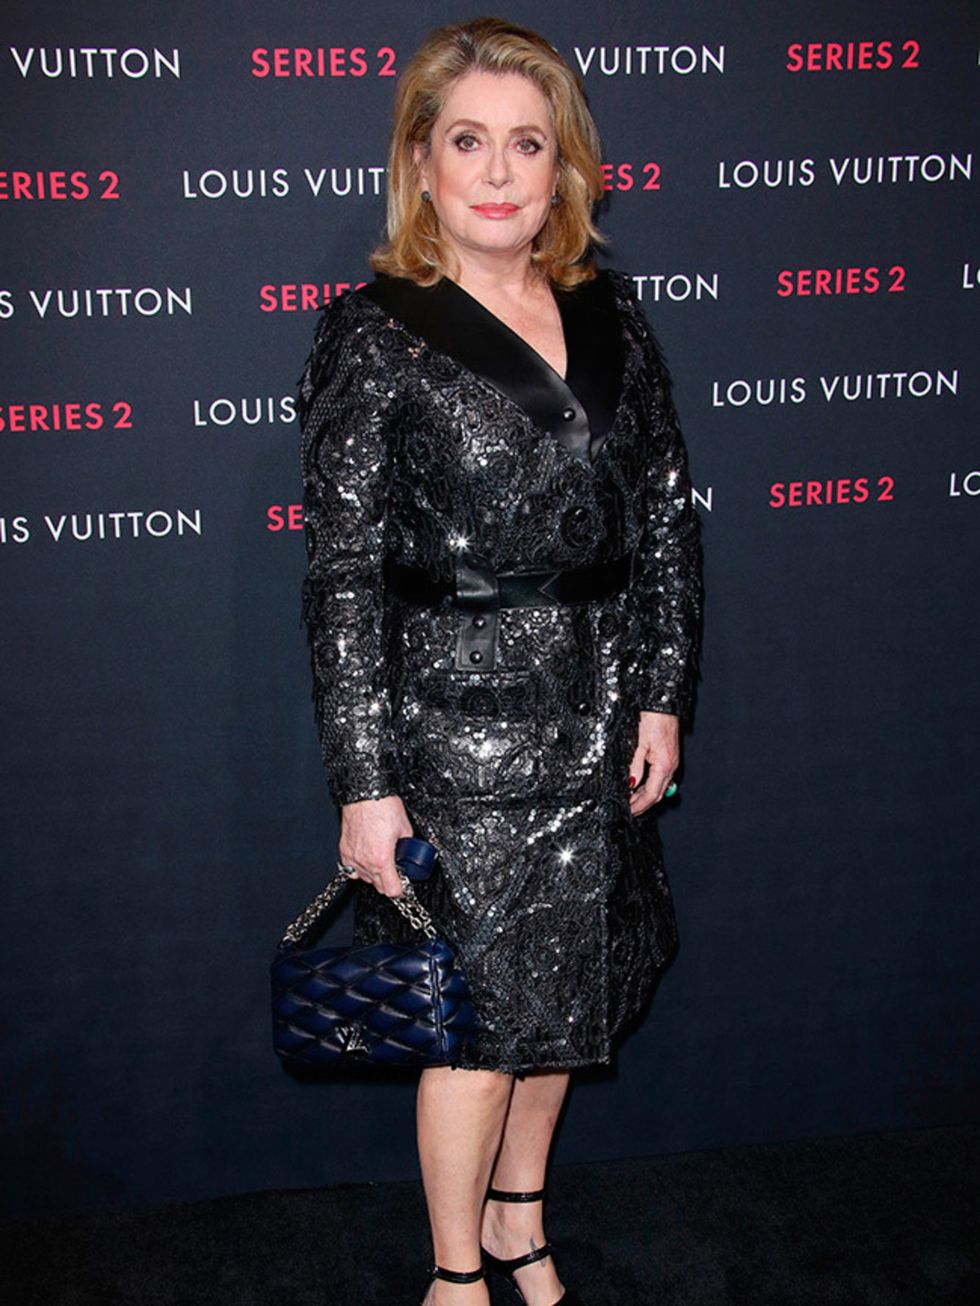 <p>Catherine Deneuve at the Louis Vuitton Series 2 Exhibition in Los Angeles, February 2015.</p>